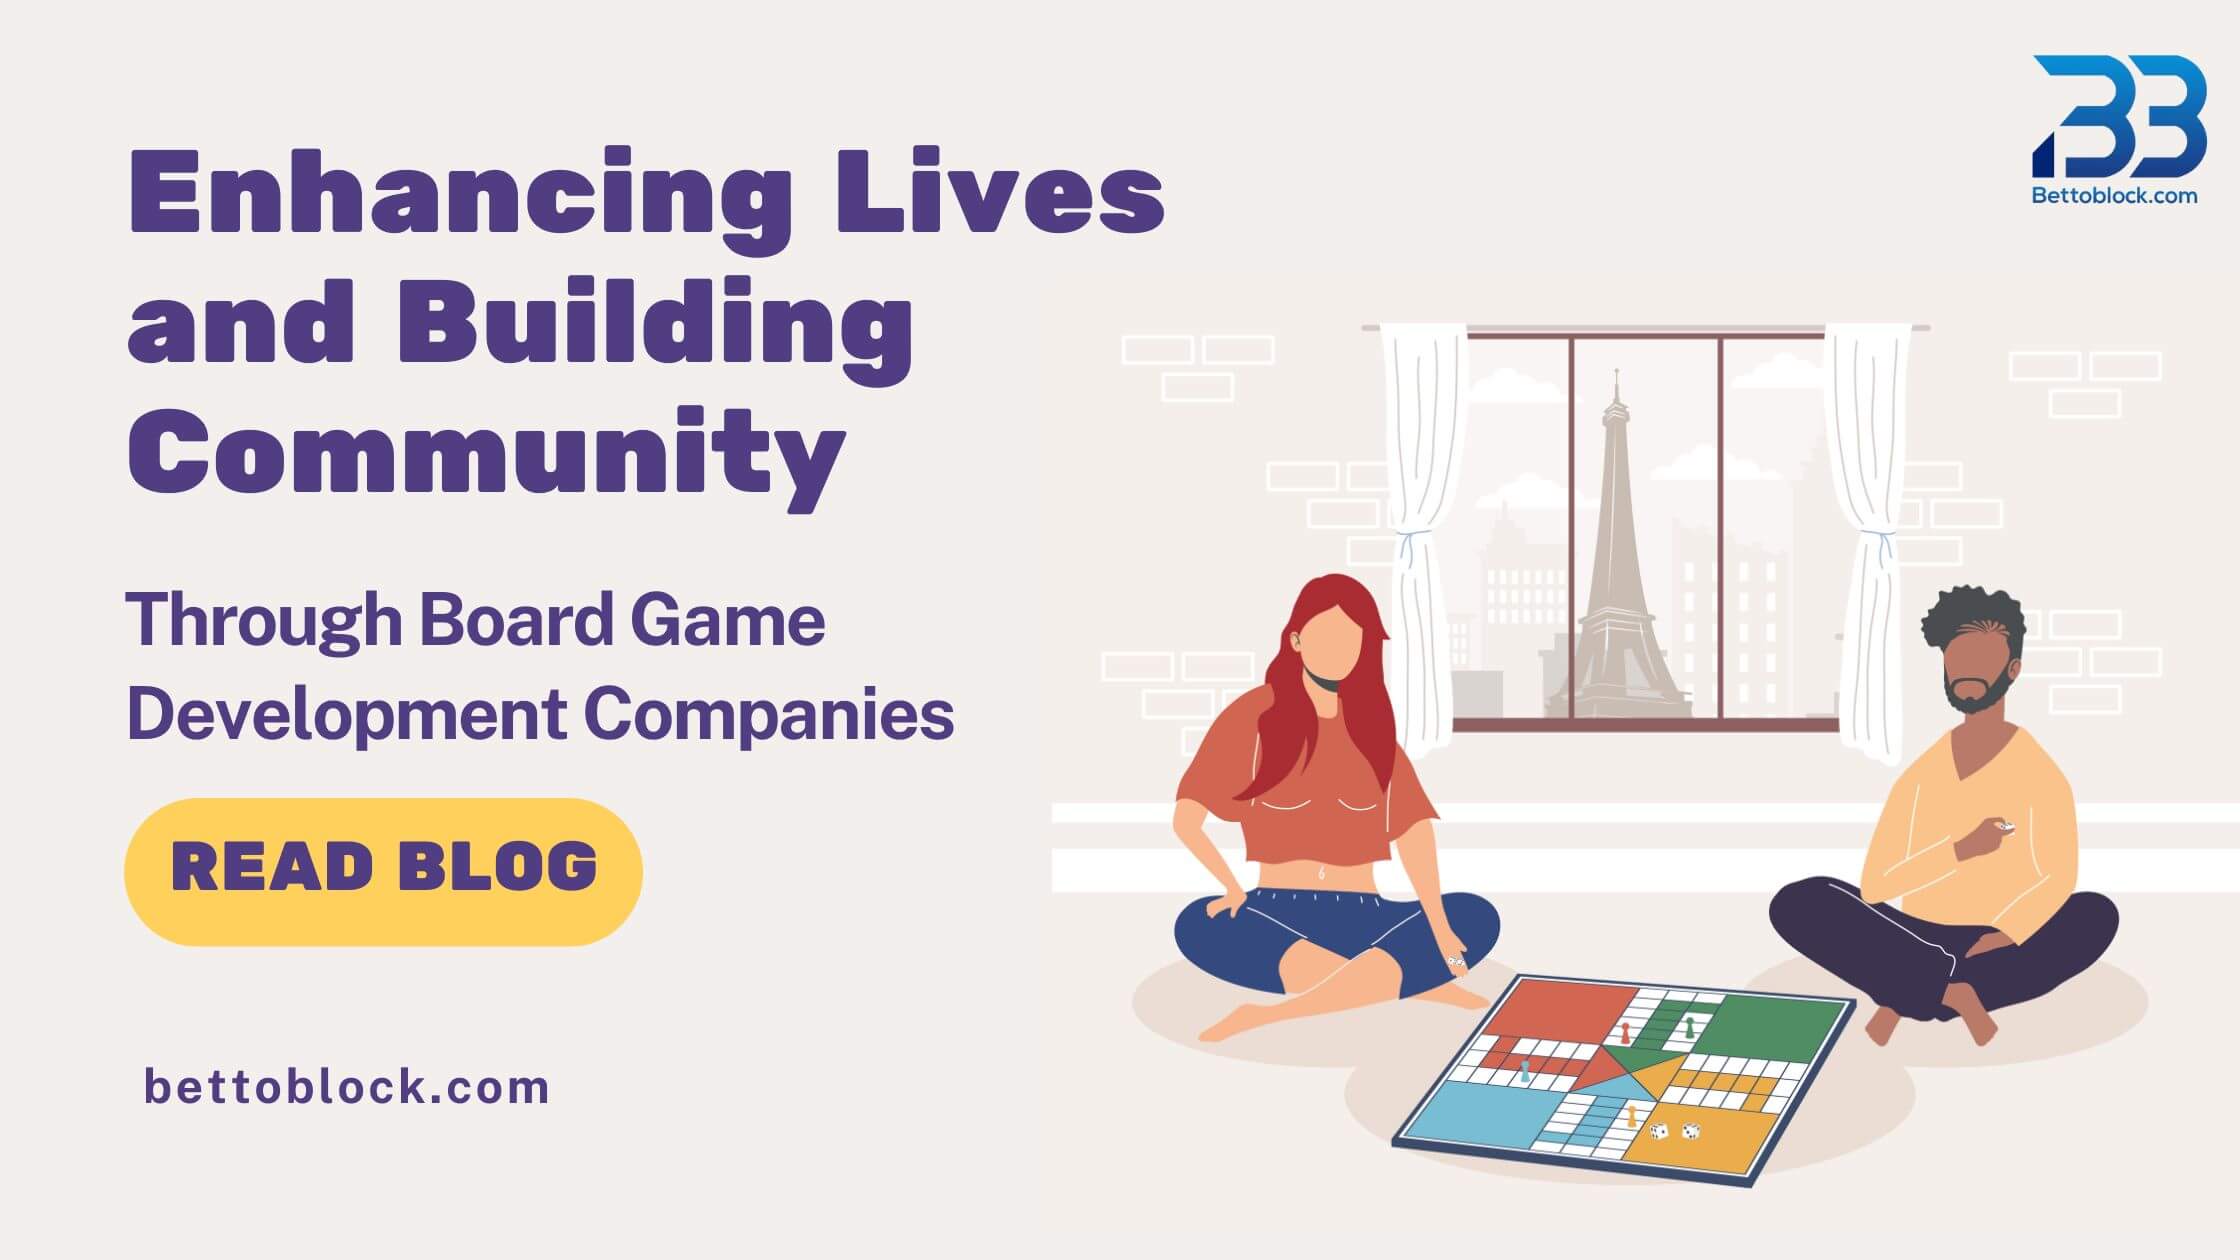 How Board Game Development Companies Enrich Lives and Communities